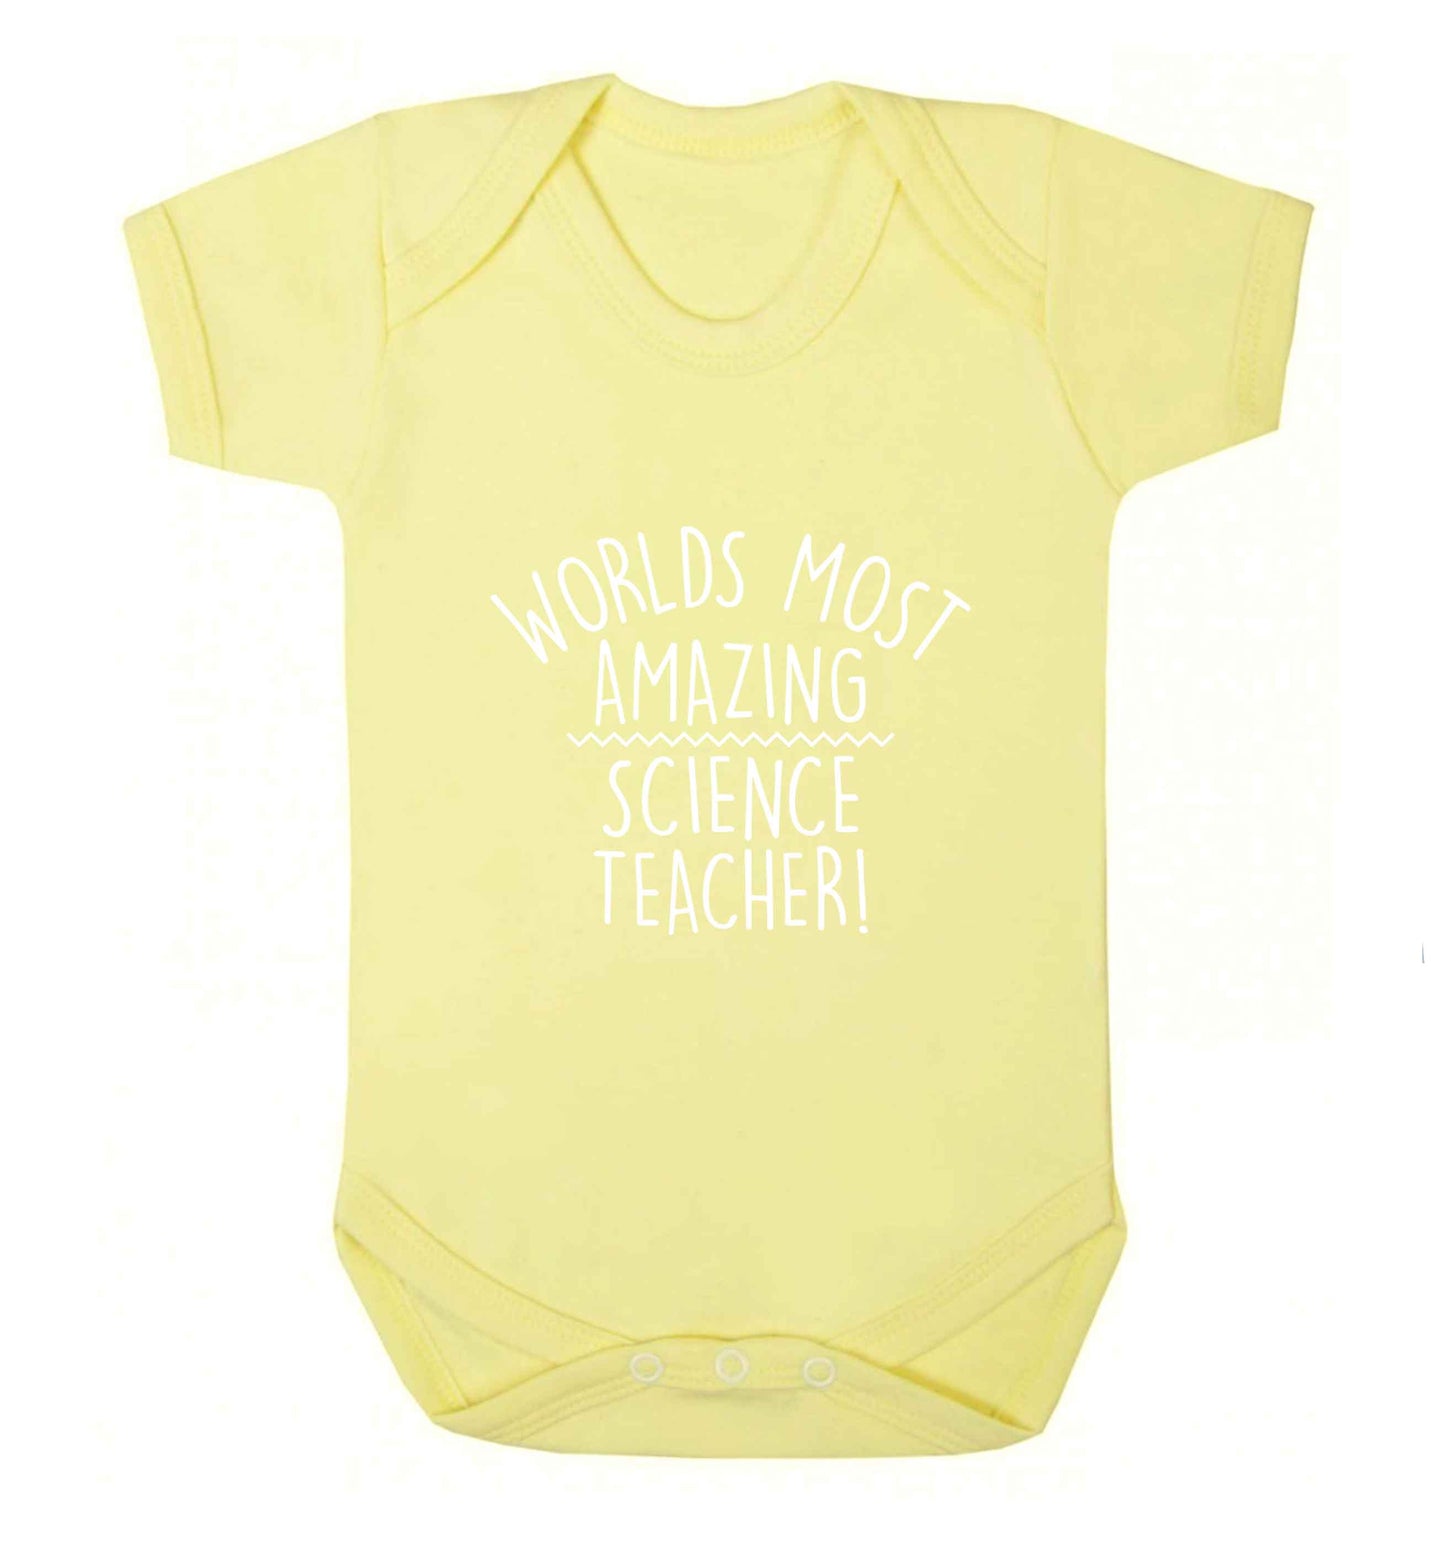 Worlds most amazing science teacher baby vest pale yellow 18-24 months